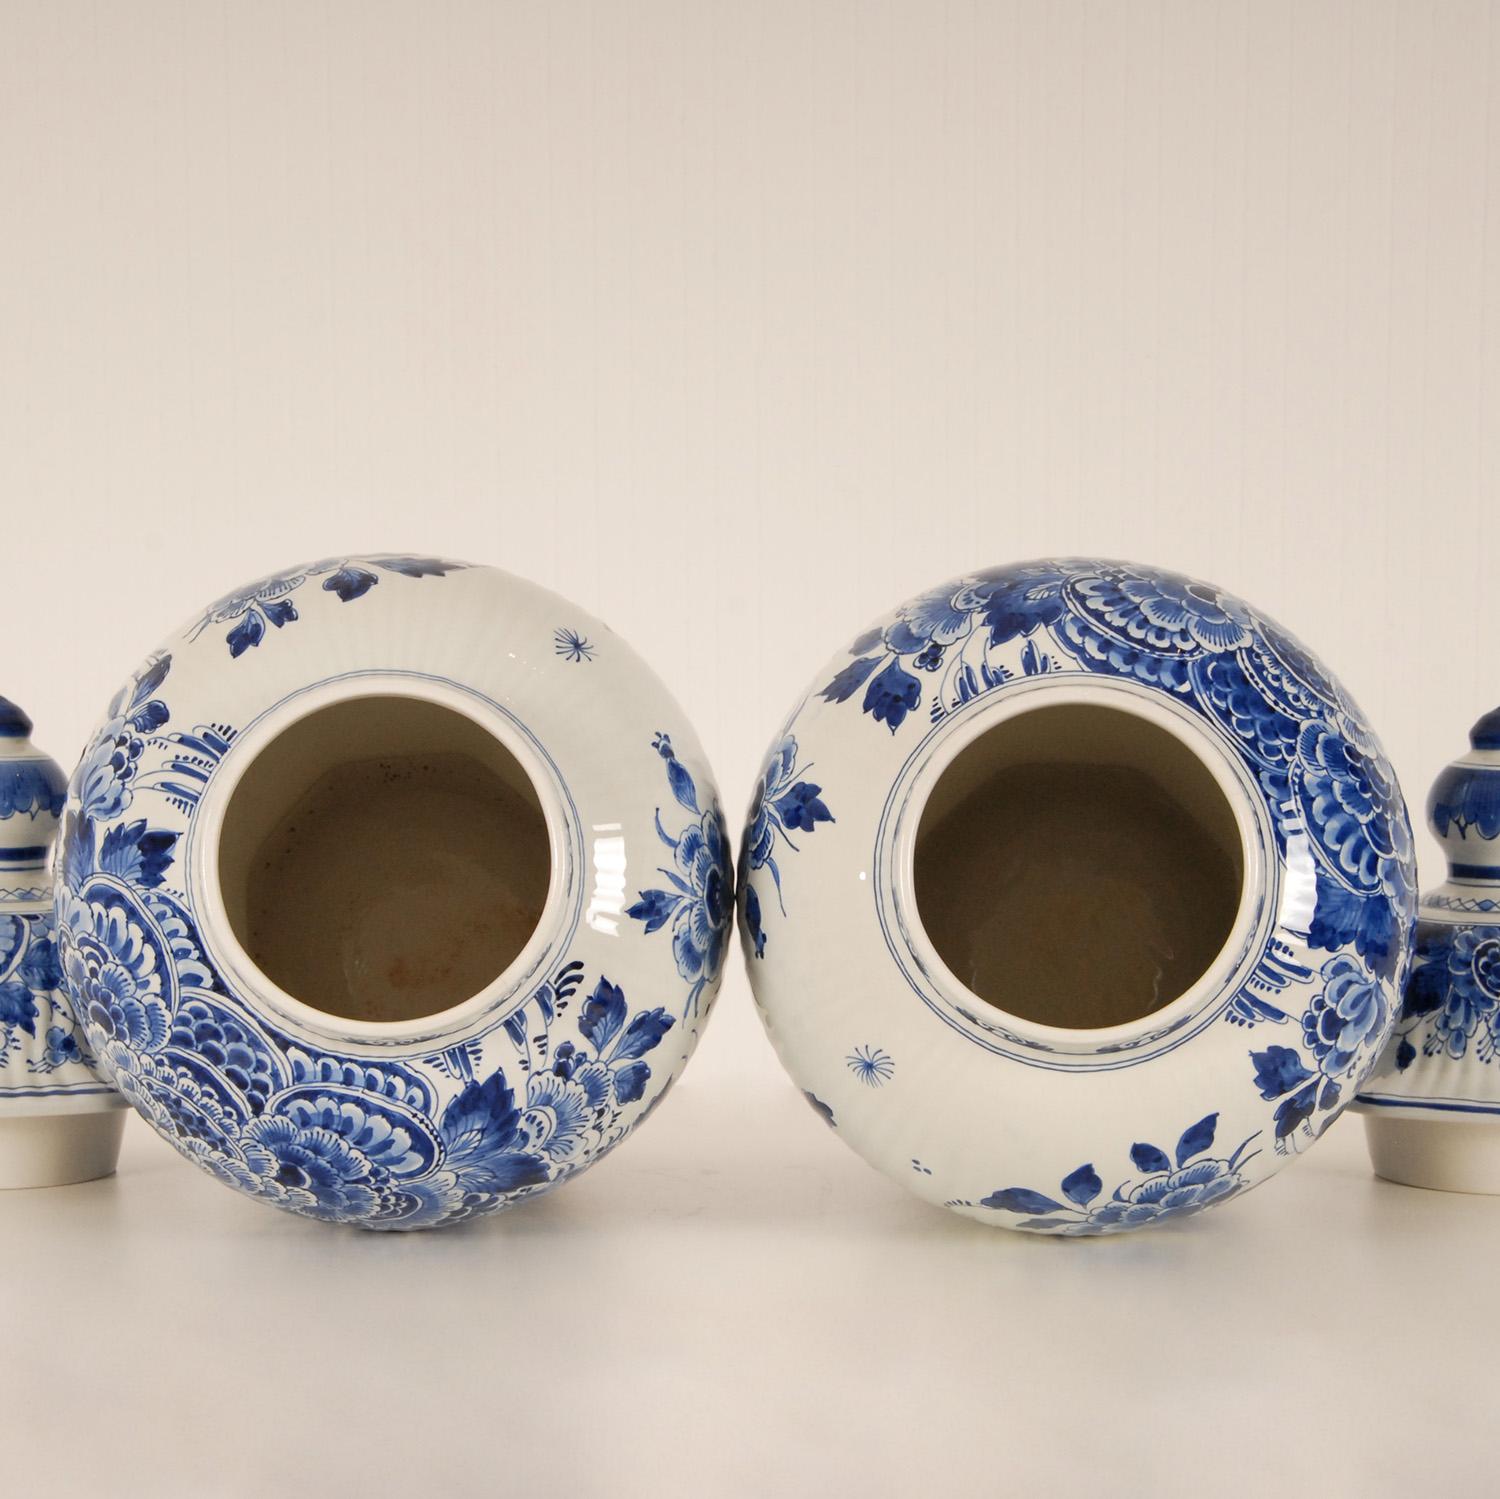 Royal Delft Baluster Vases Earthenware Blue White Ceramic Covered Jars -  a pair In Good Condition For Sale In Wommelgem, VAN